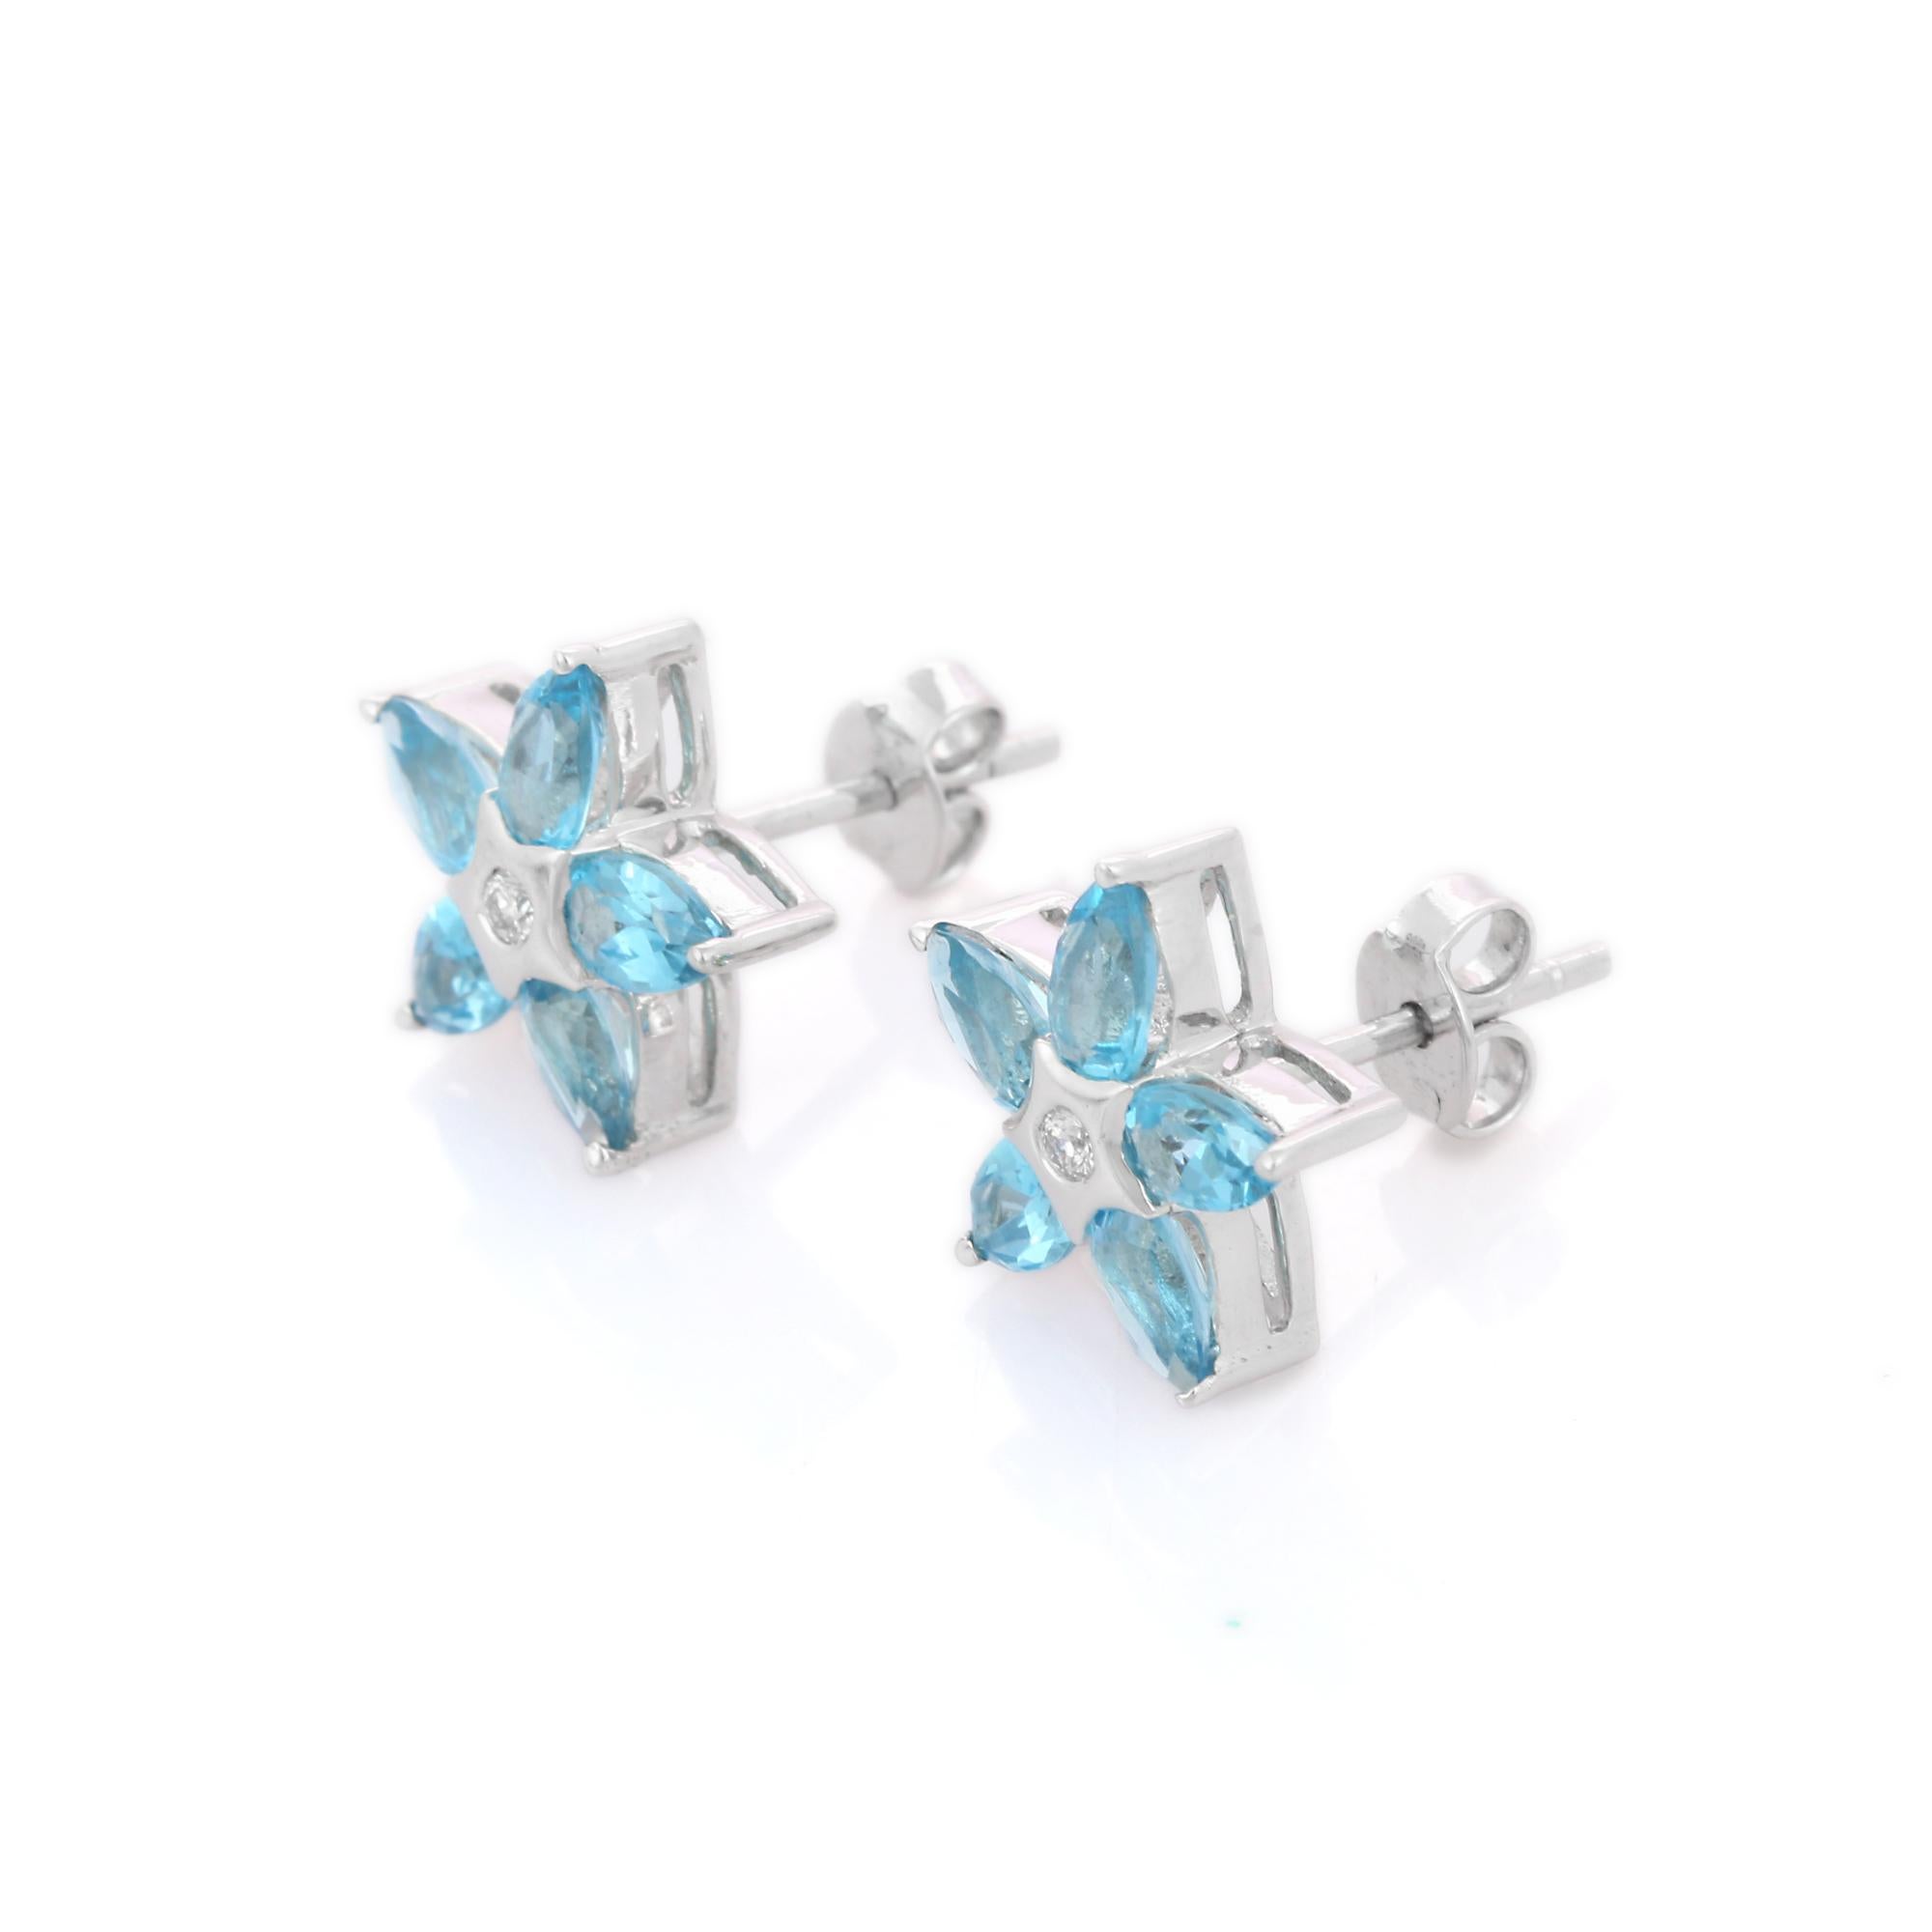 Earrings create a subtle beauty while showcasing the colors of the natural precious gemstones and illuminating diamonds making a statement.

Pear cut Blue Topaz and Diamond Stud earrings in 18K gold. Embrace your look with these stunning pair of